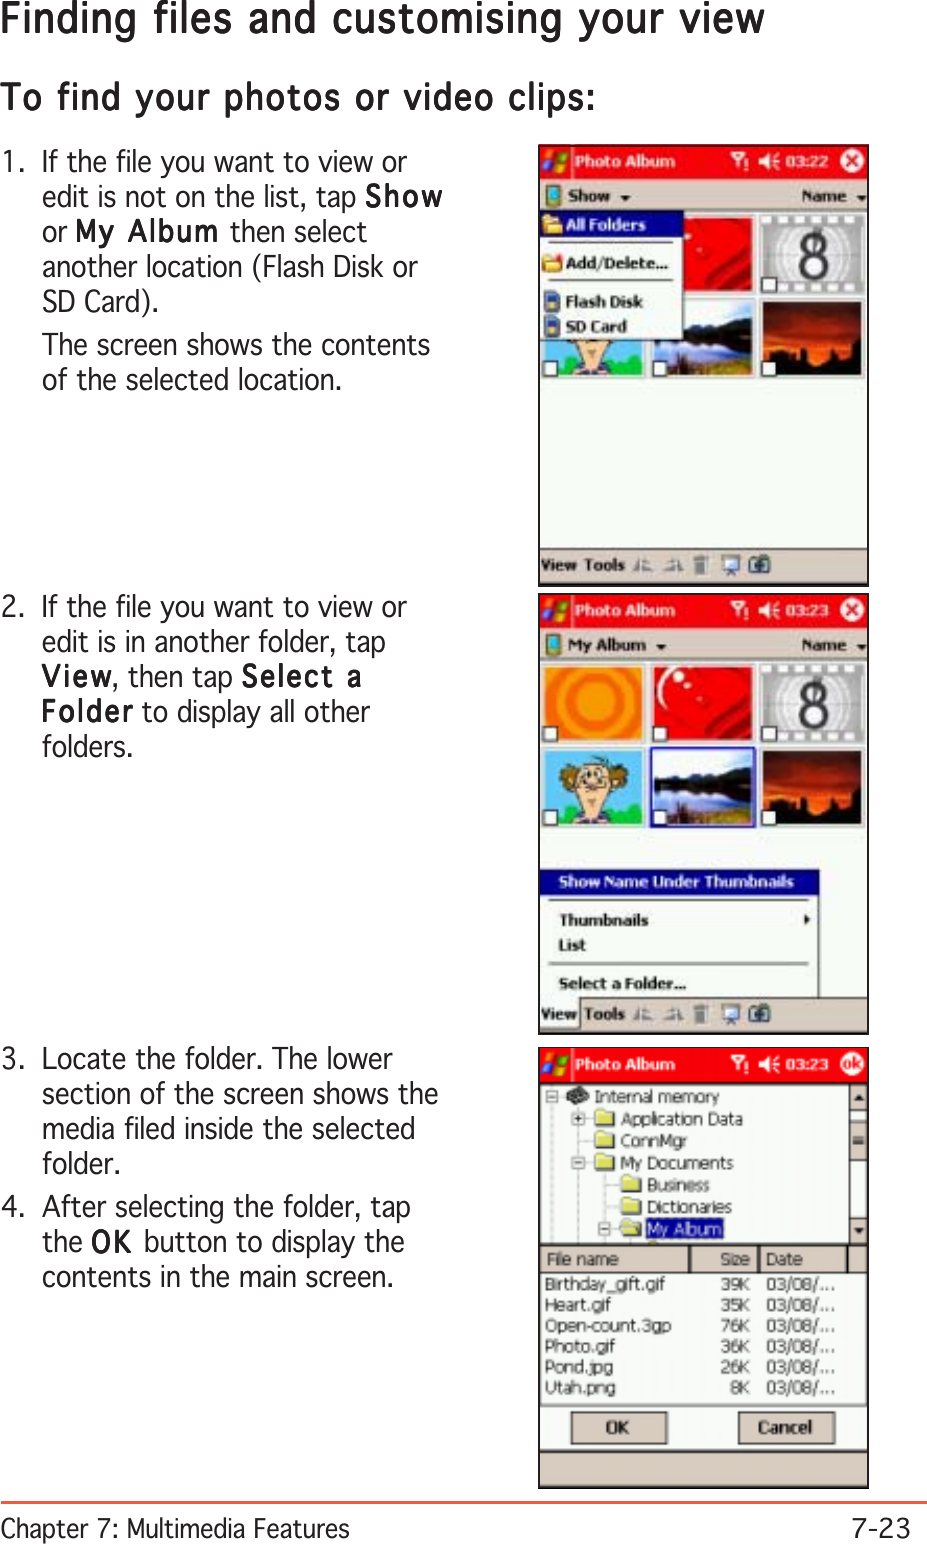 Chapter 7: Multimedia Features7-23Finding files and customising your viewFinding files and customising your viewFinding files and customising your viewFinding files and customising your viewFinding files and customising your viewTo find your photos or video clips:To find your photos or video clips:To find your photos or video clips:To find your photos or video clips:To find your photos or video clips:1. If the file you want to view oredit is not on the list, tap ShowShowShowShowShowor My Album My Album My Album My Album My Album then selectanother location (Flash Disk orSD Card).The screen shows the contentsof the selected location.2. If the file you want to view oredit is in another folder, tapViewViewViewViewVi e w, then tap Select aSelect aSelect aSelect aSelect aFolderFolderFolderFolderFold er to display all otherfolders.3. Locate the folder. The lowersection of the screen shows themedia filed inside the selectedfolder.4. After selecting the folder, tapthe OKOKOKOKO K  button to display thecontents in the main screen.